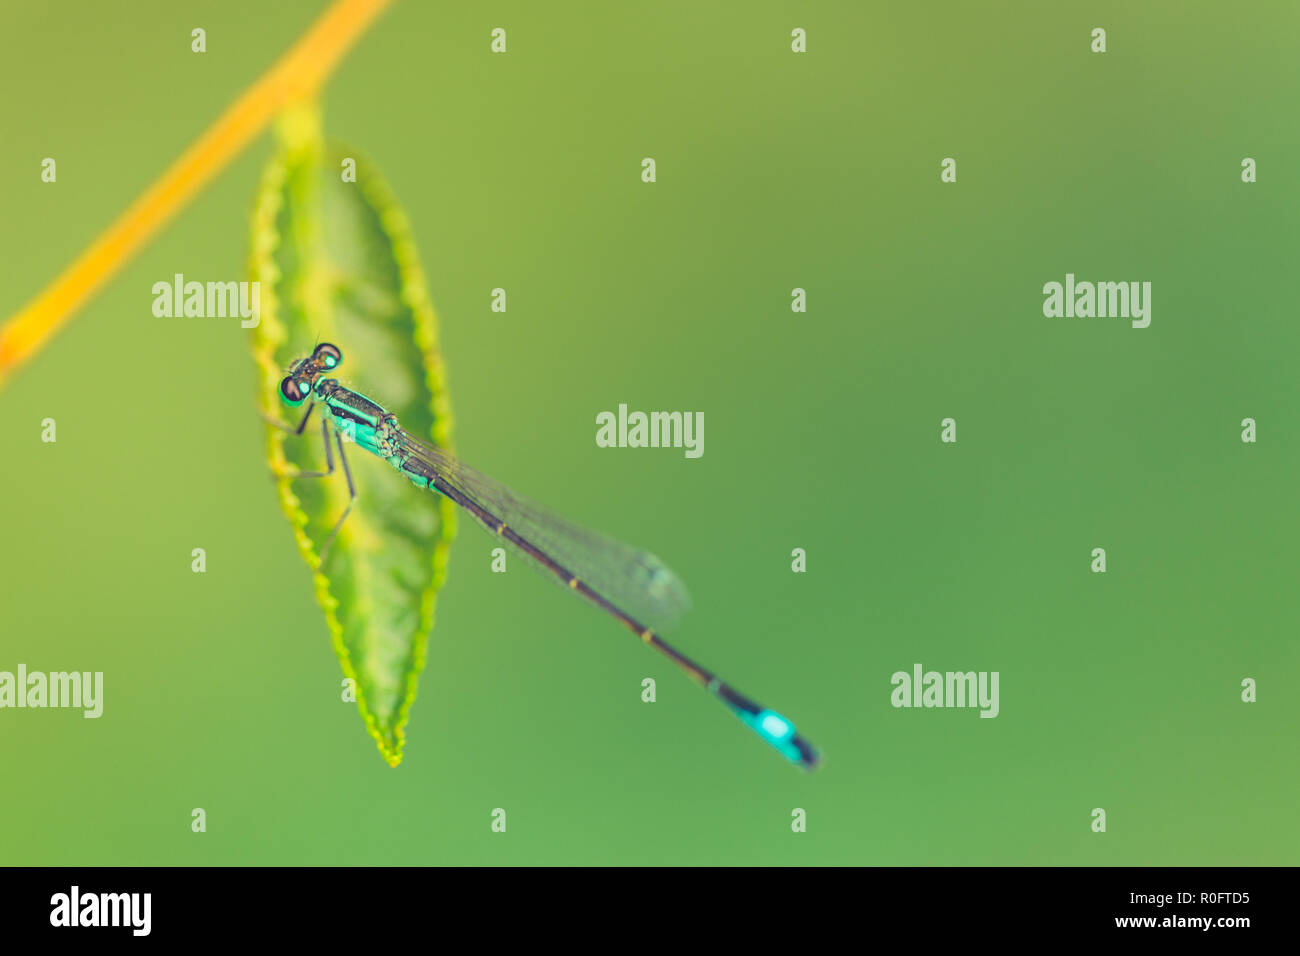 Blue dragonfly fresh green leaf. Nature environment, spring summer insect nature details. Stock Photo